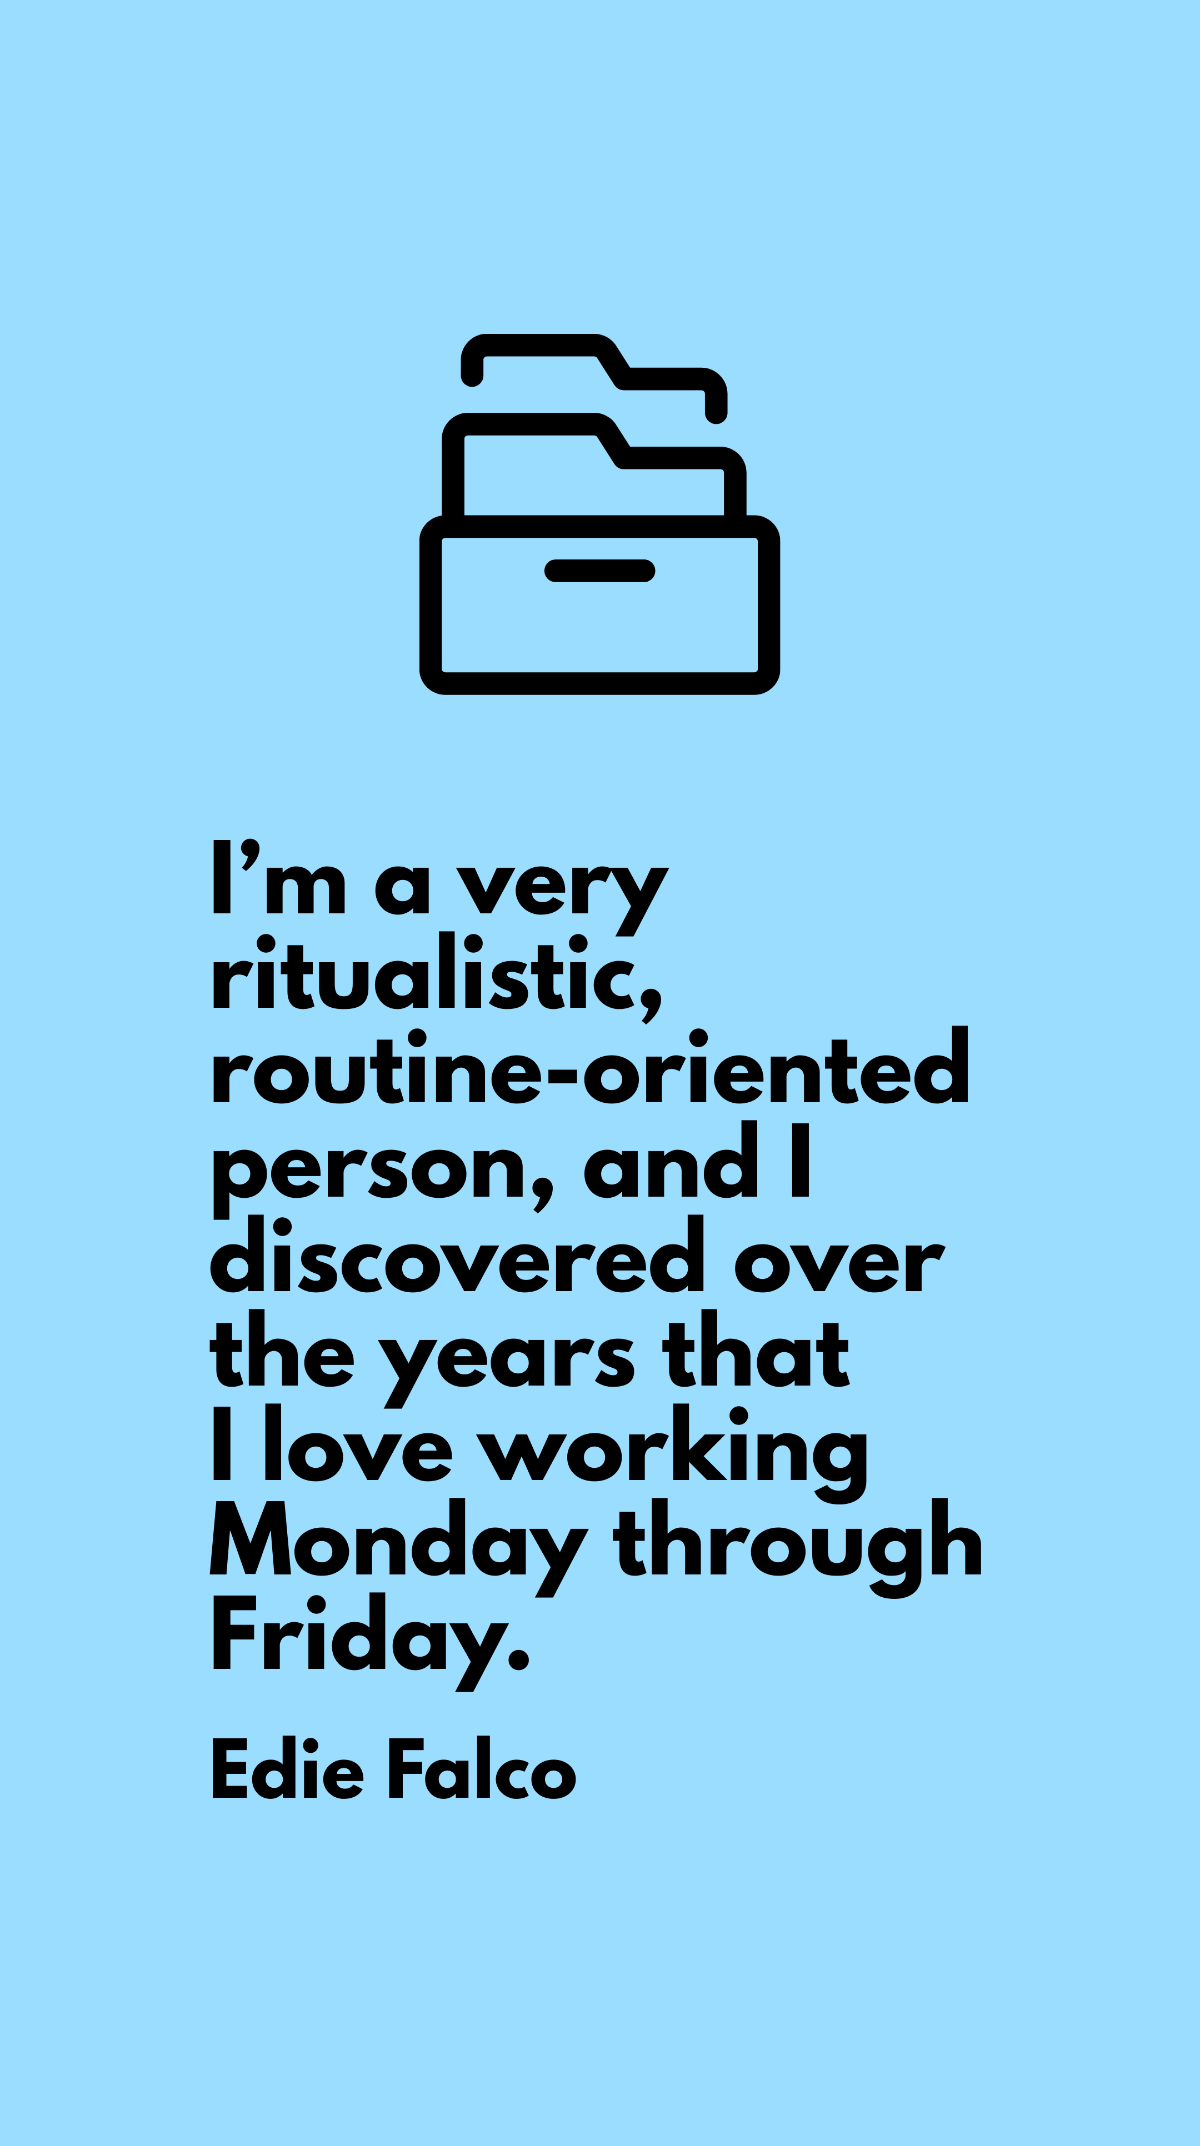 Free Edie Falco - I’m a very ritualistic, routine-oriented person, and I discovered over the years that I love working Monday through Friday.  Template